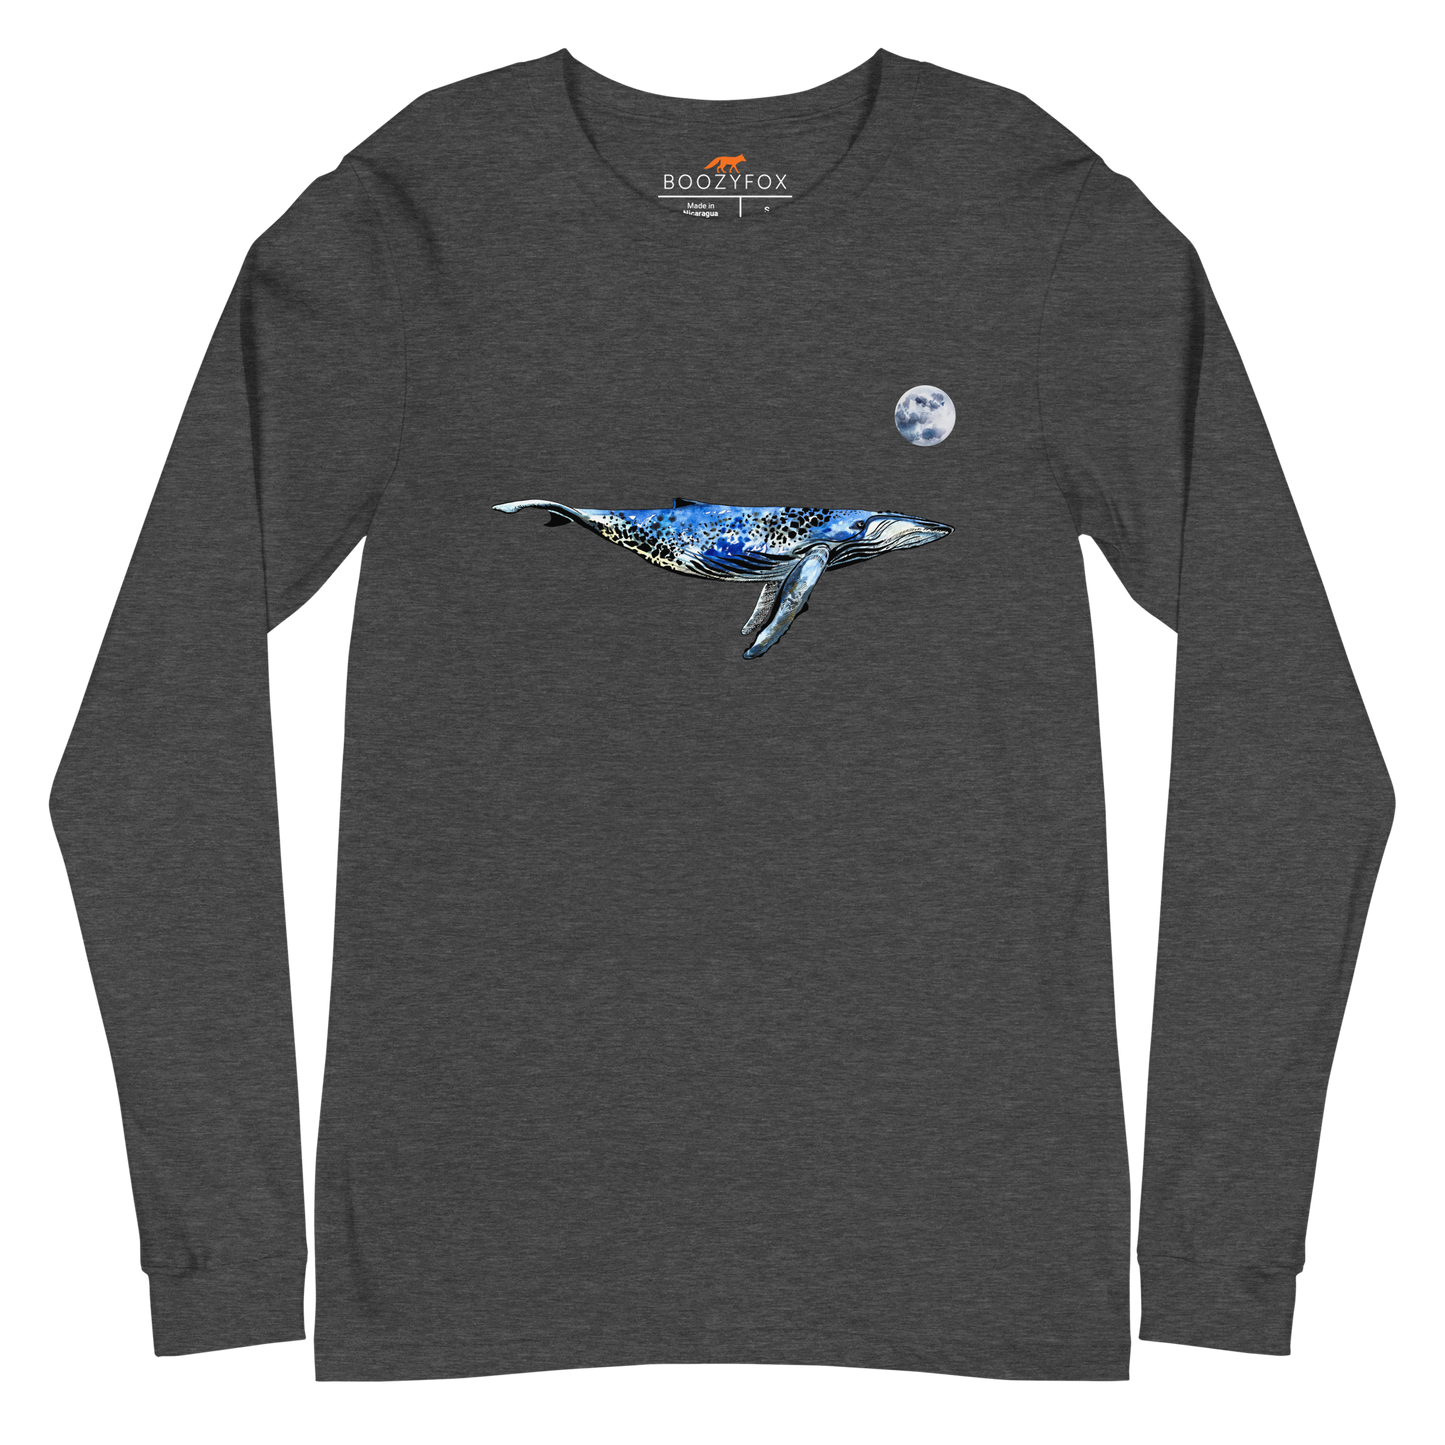 Dark Grey Heather Whale Long Sleeve Tee featuring a majestic Whale Under The Moon graphic on the chest - Cool Whale Long Sleeve Graphic Tees - Boozy Fox